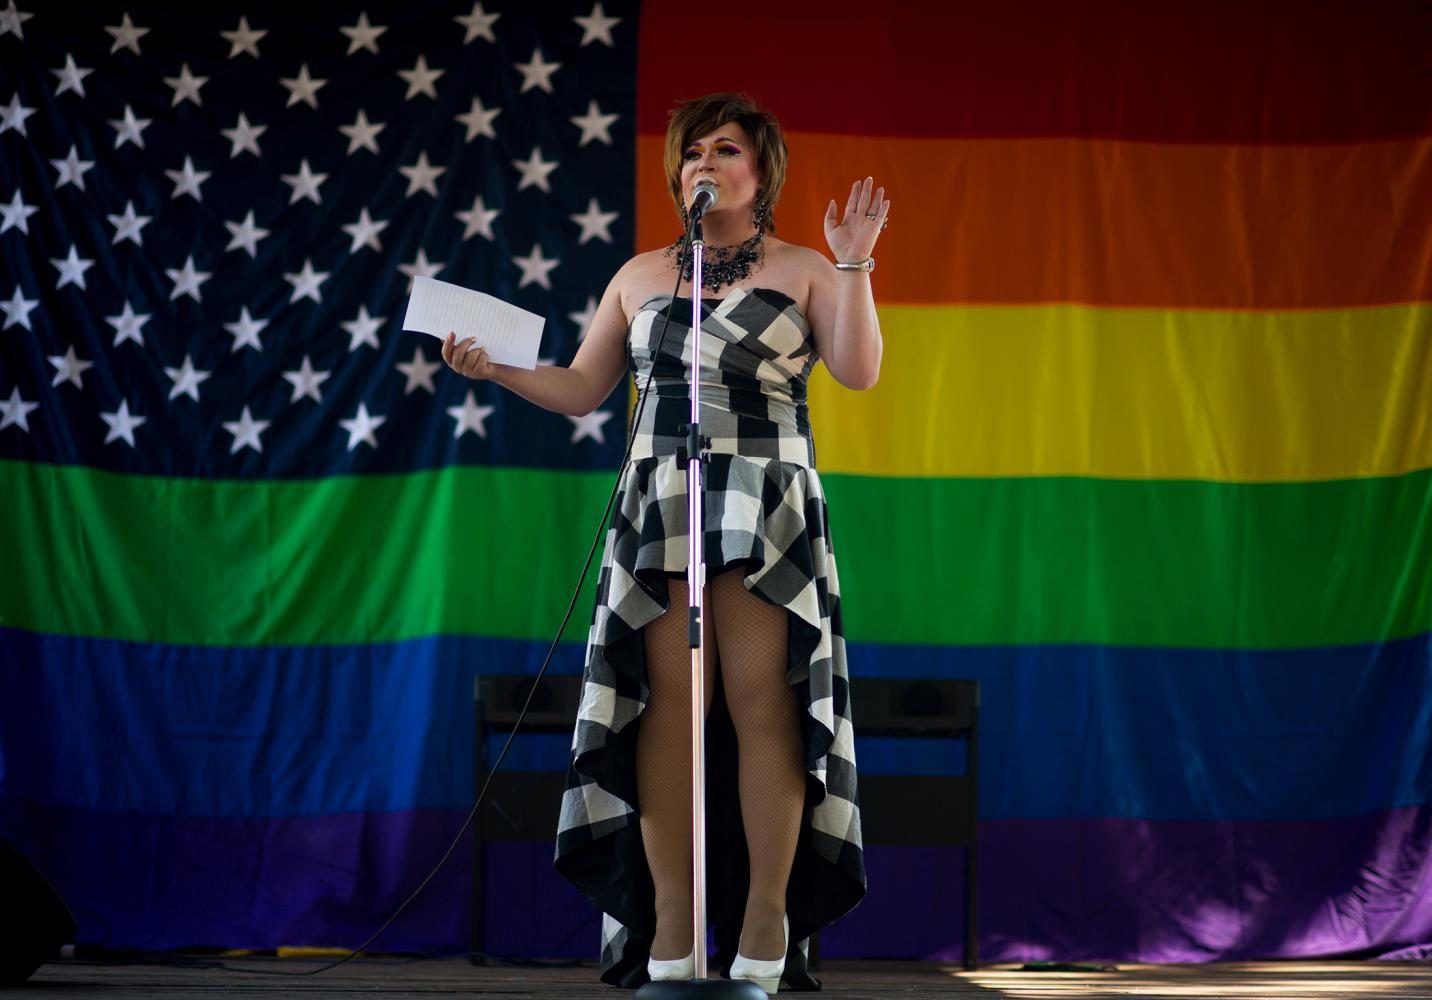 Aquasha DeLusty, a pride march leader, speaks about progress and setbacks the LGBTQ community has made in the U.S. before introducing other speakers on to the stage Saturday at the Palouse Pride Festival in Moscow.